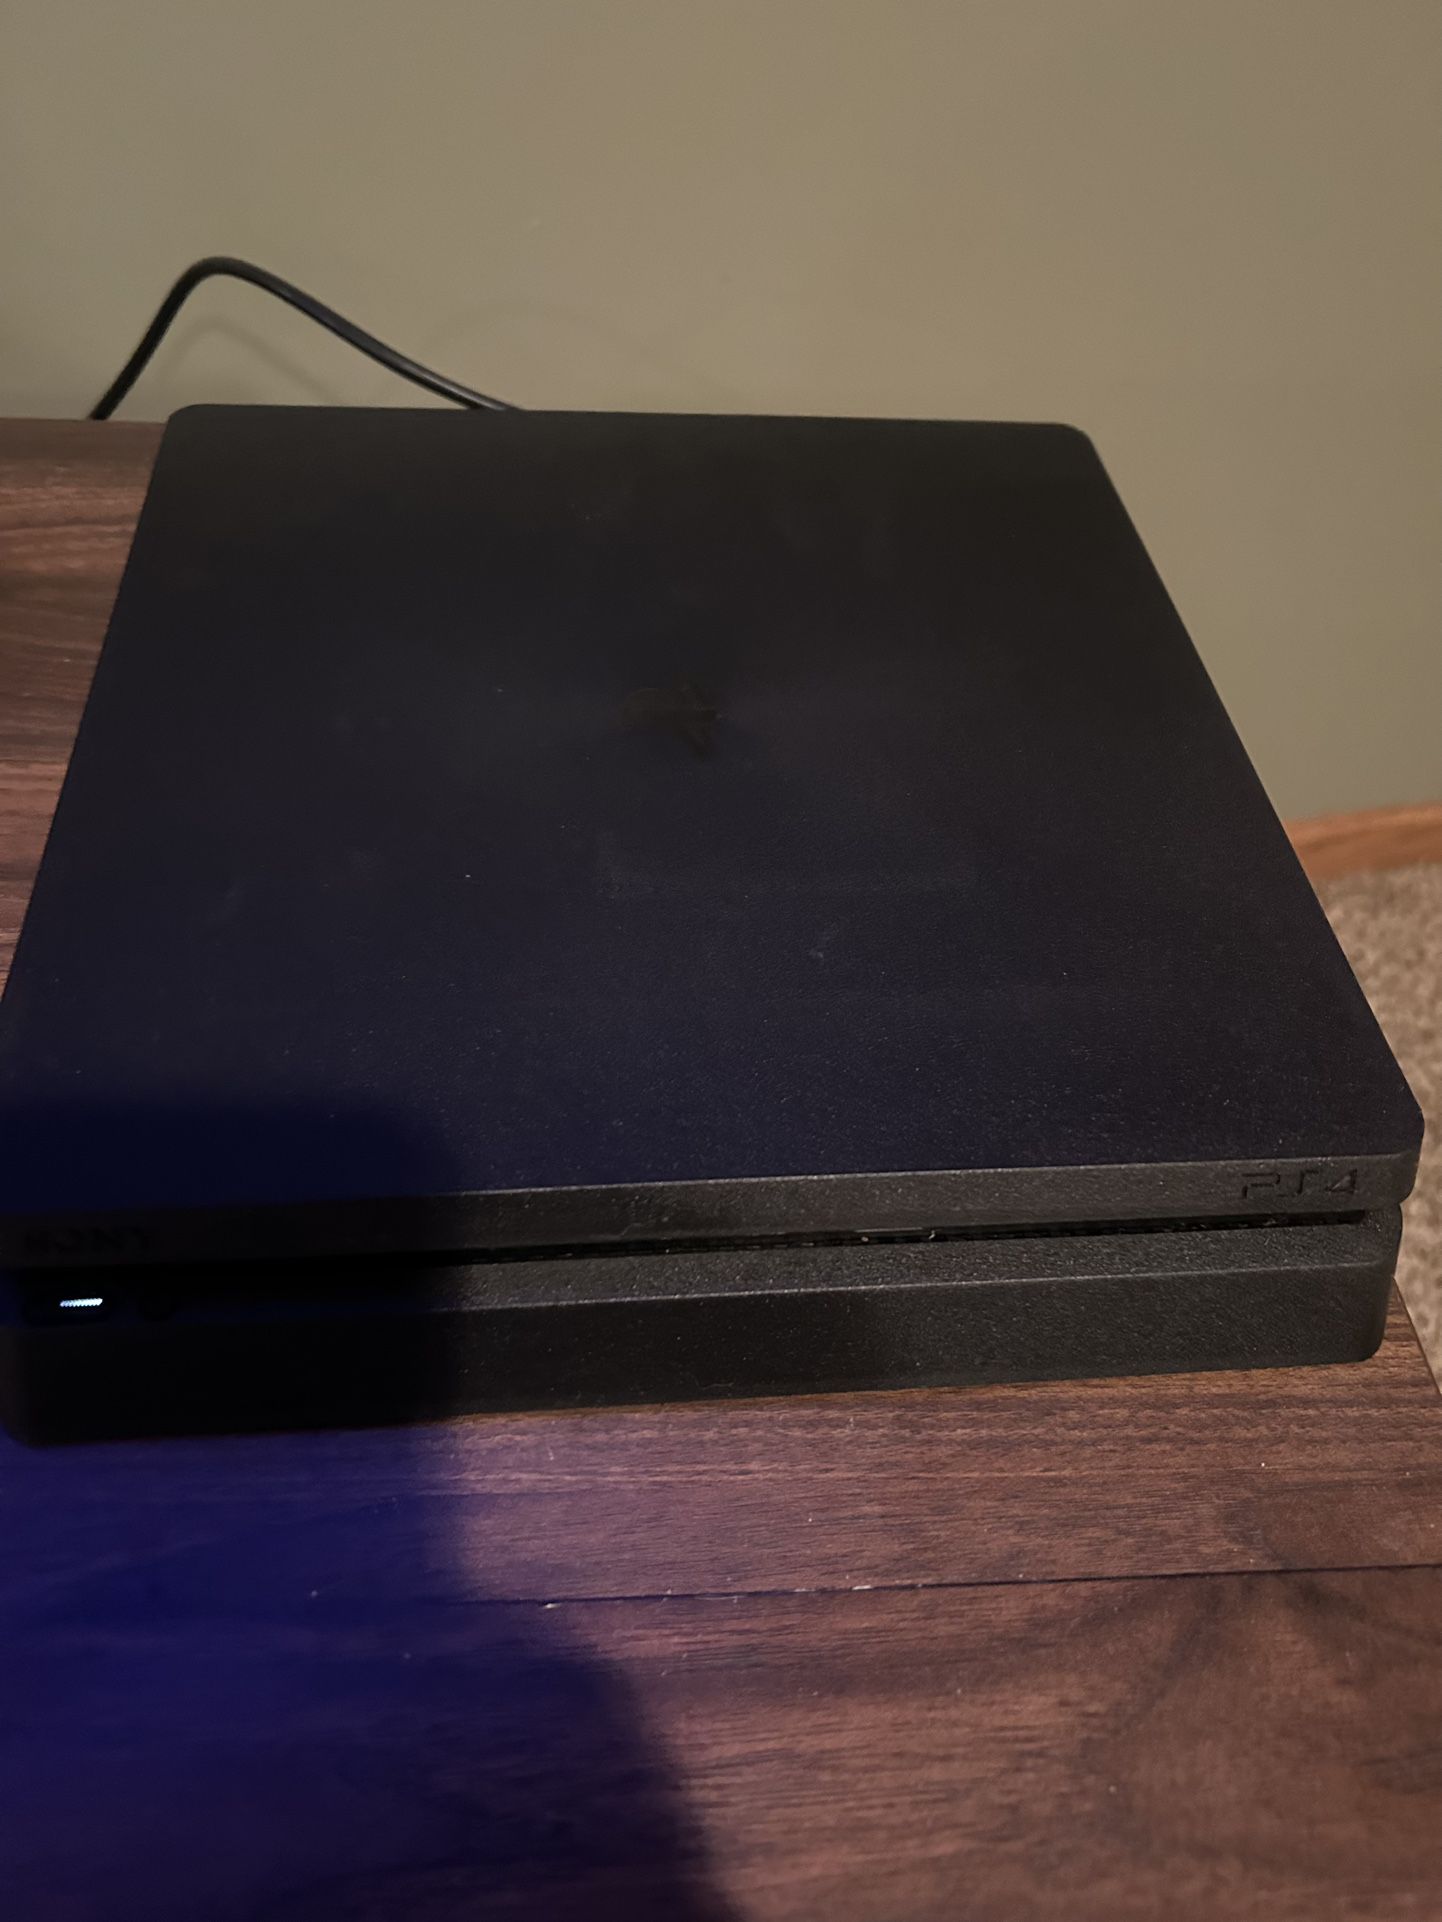 Ps4 Slim With 1 Terabyte 7200rpm HDD